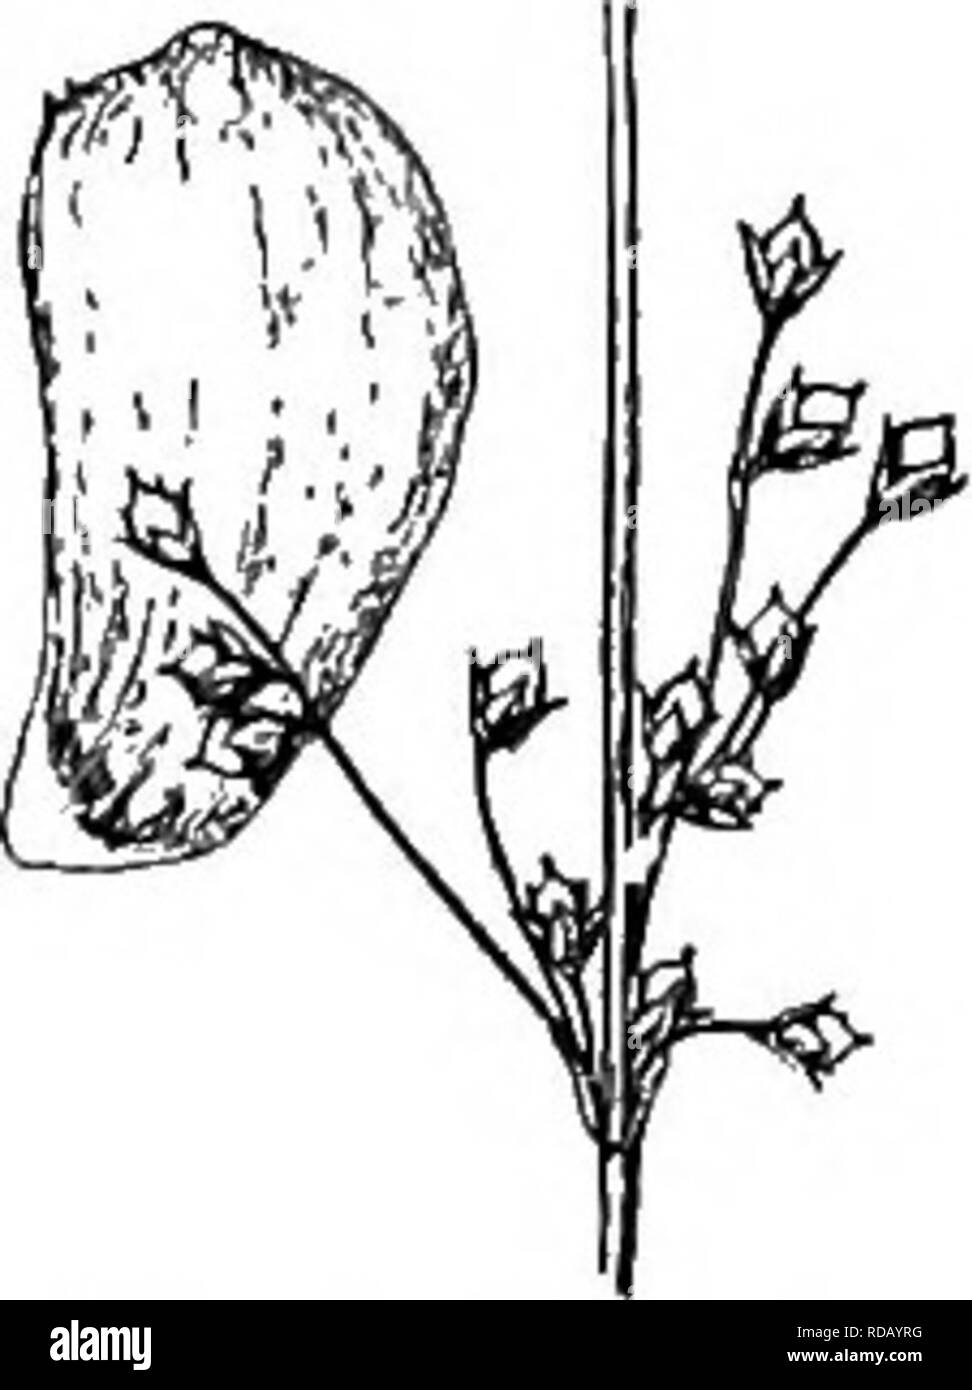 . Gray's new manual of botany. A handbook of the flowering plants and ferns of the central and northeastern United States and adjacent Canada. Botany. 579. J. bait., V. lit. Inflorescence x %. Fruitlnff flower x 3. of the ovary ; seeds rather large (about 1 mm. long), nearly obtuse, delicately ribbed and cross-lined. ââ Sandy (mostly brackish) shores, Nfd. to N. Y. and Pa.; the Great Lakes, and weslw. Fig. 579. Ii5. J. filif6rmis L. Scape very slender (1.5-6 dm. high), pliant; cyme fevf-flowered, almost simple ; flowers 3 mm. long ; sepals lanceolate, petals a little shorter and less acute, mo Stock Photo